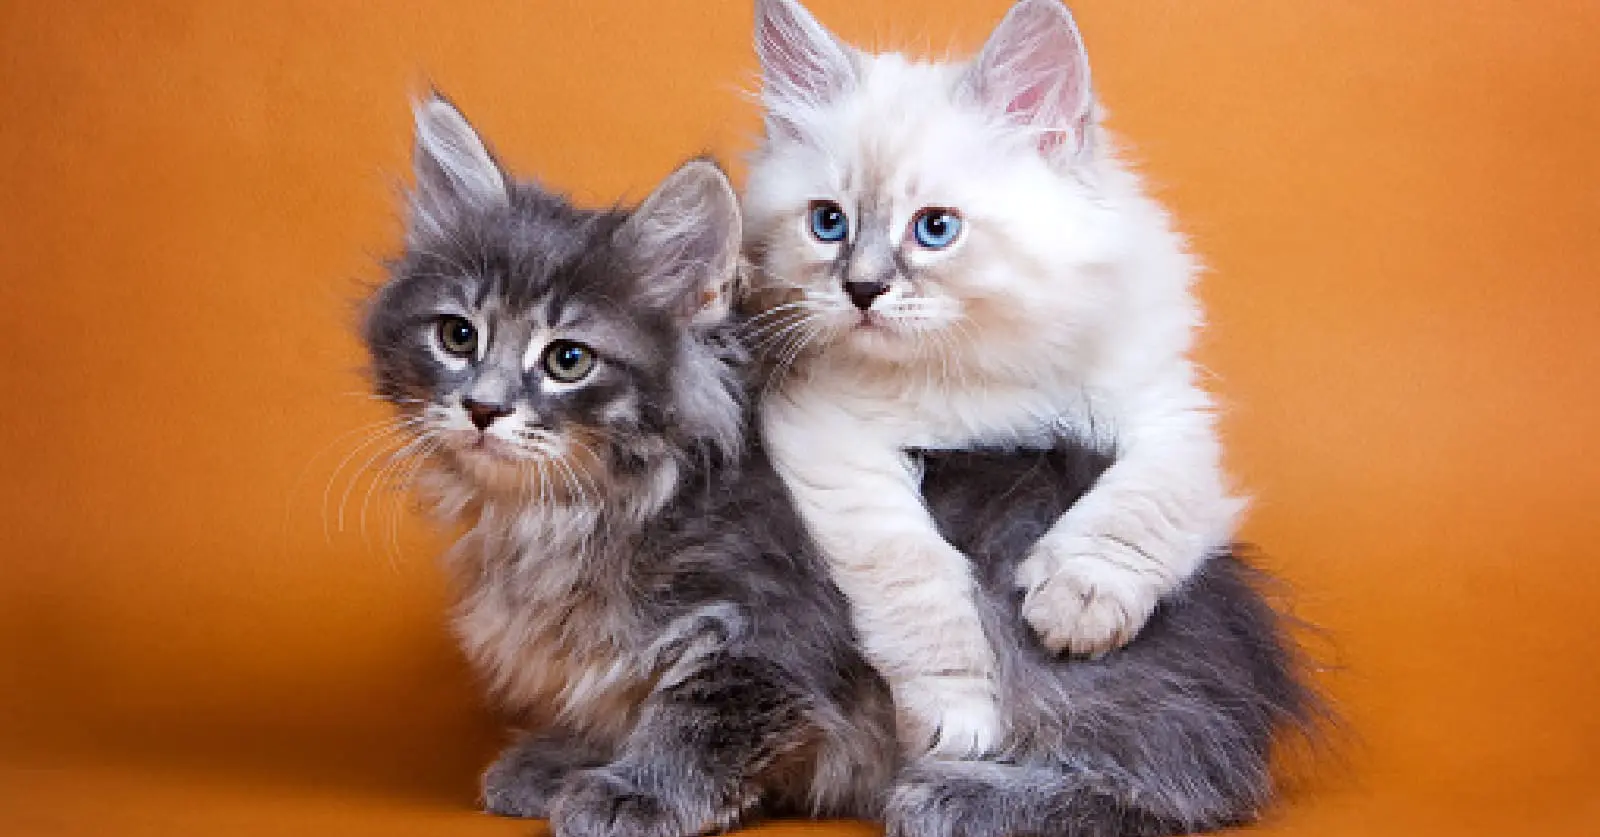 Are you fascinated with grey cat breeds and can’t get enough of their stunning appearance? Then you'll love these top 8 silver beauties!